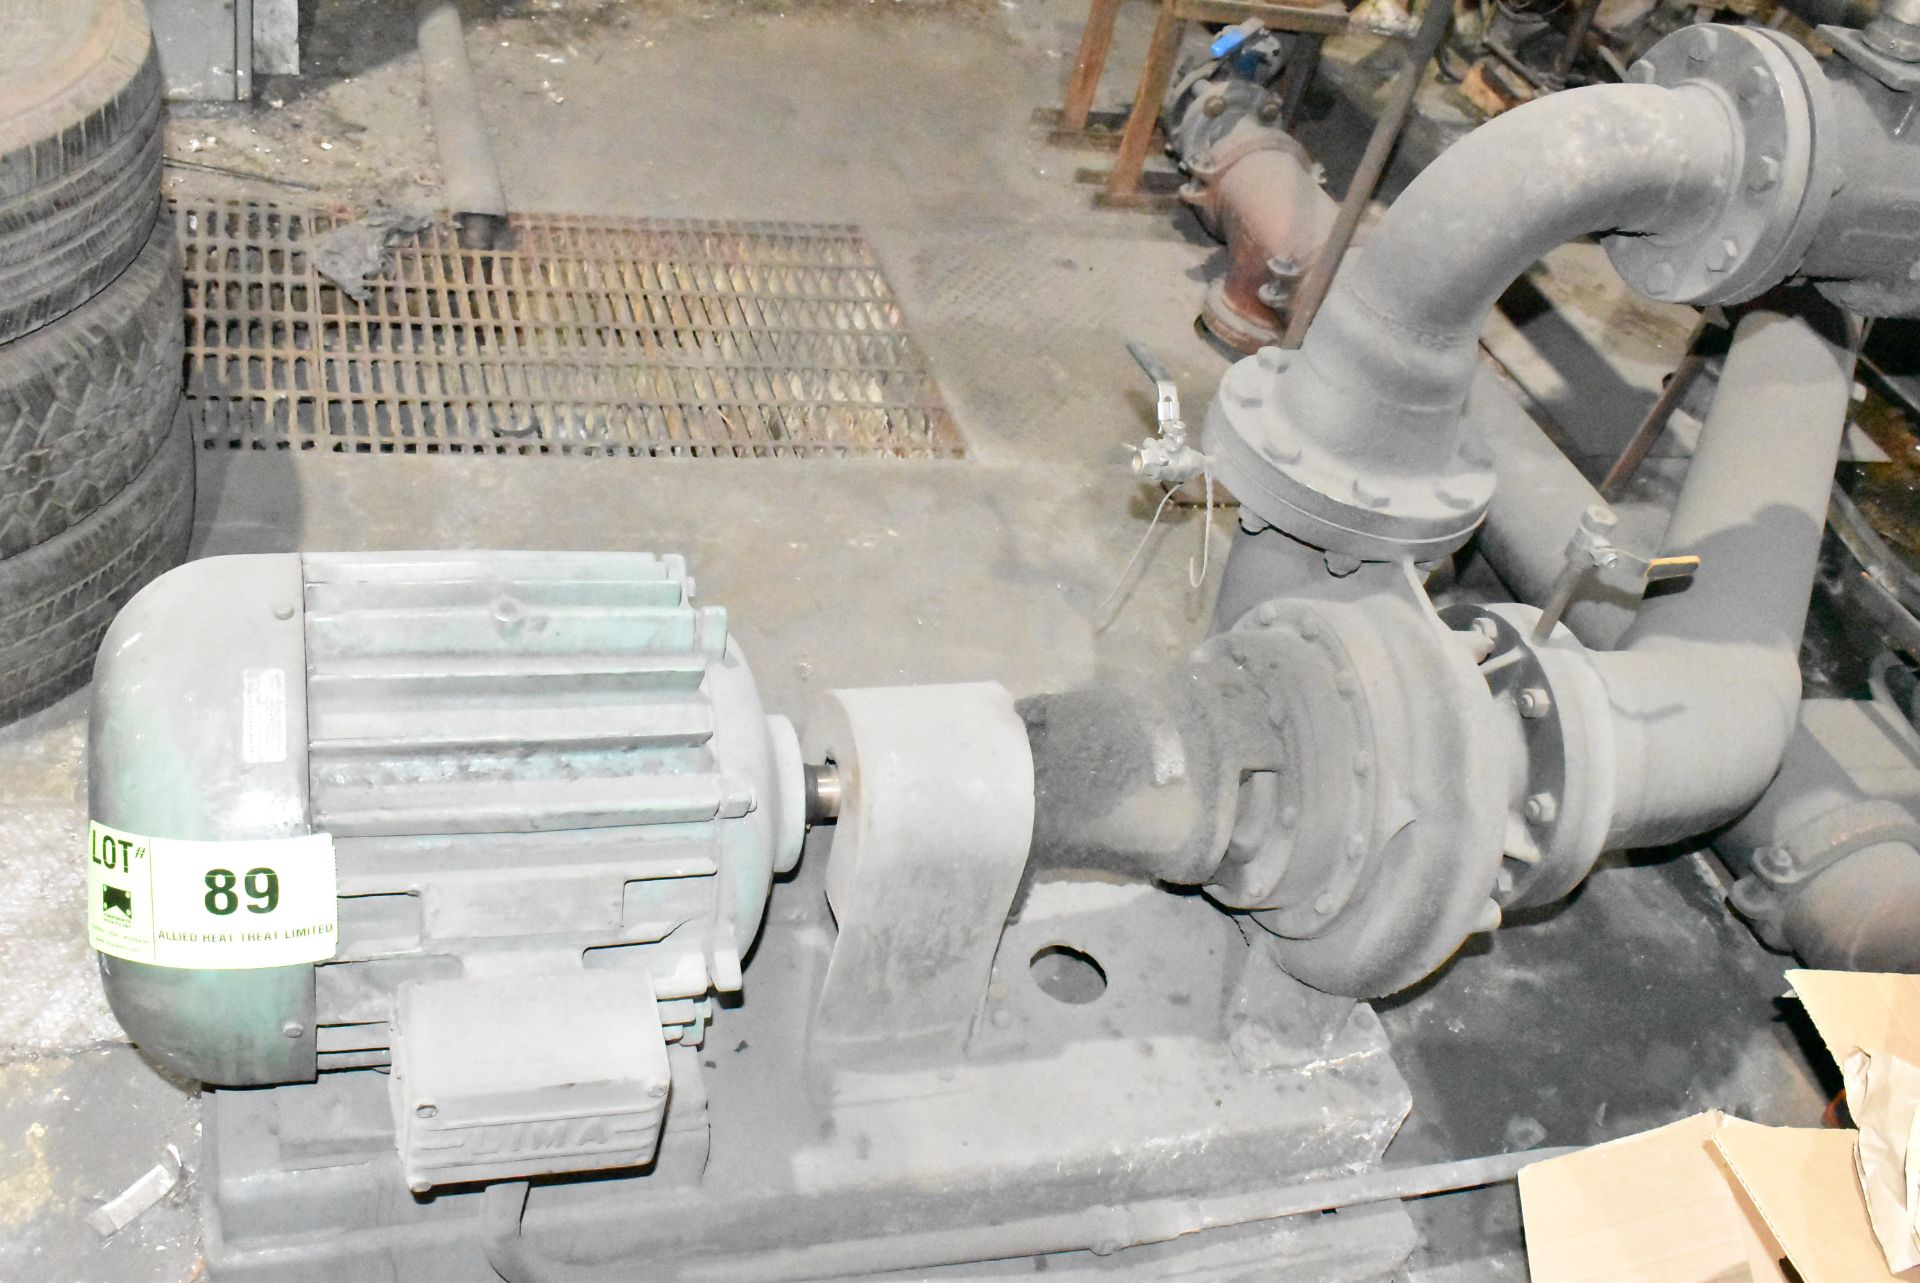 MFG UNKNOWN CENTRIFUGAL TRANSFER PUMP ASSEMBLY WITH ELECTRIC MOTOR, S/N: N/A